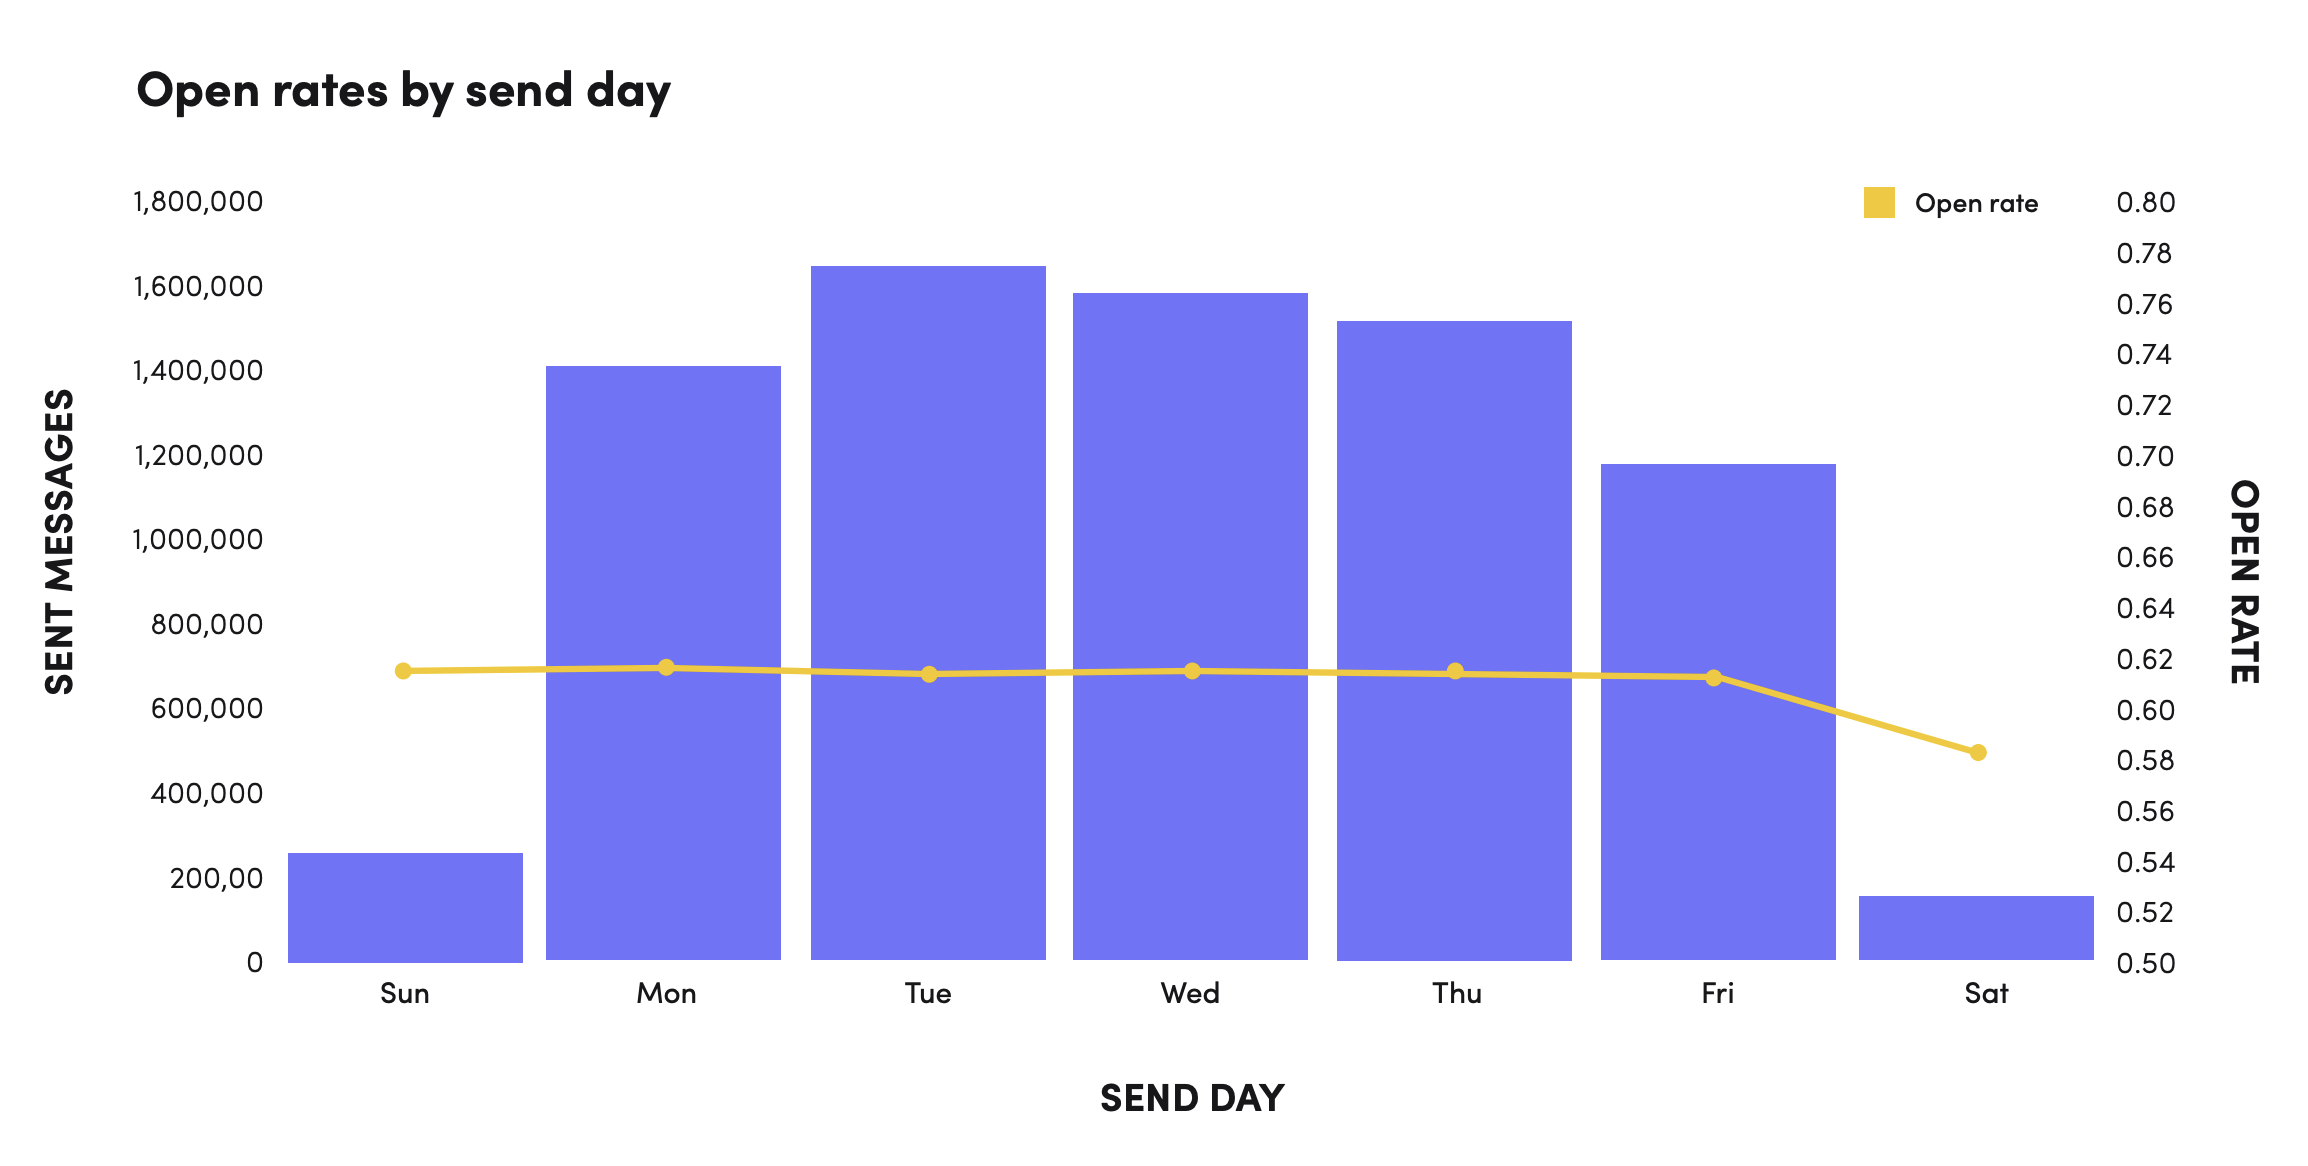 Open rates by send day